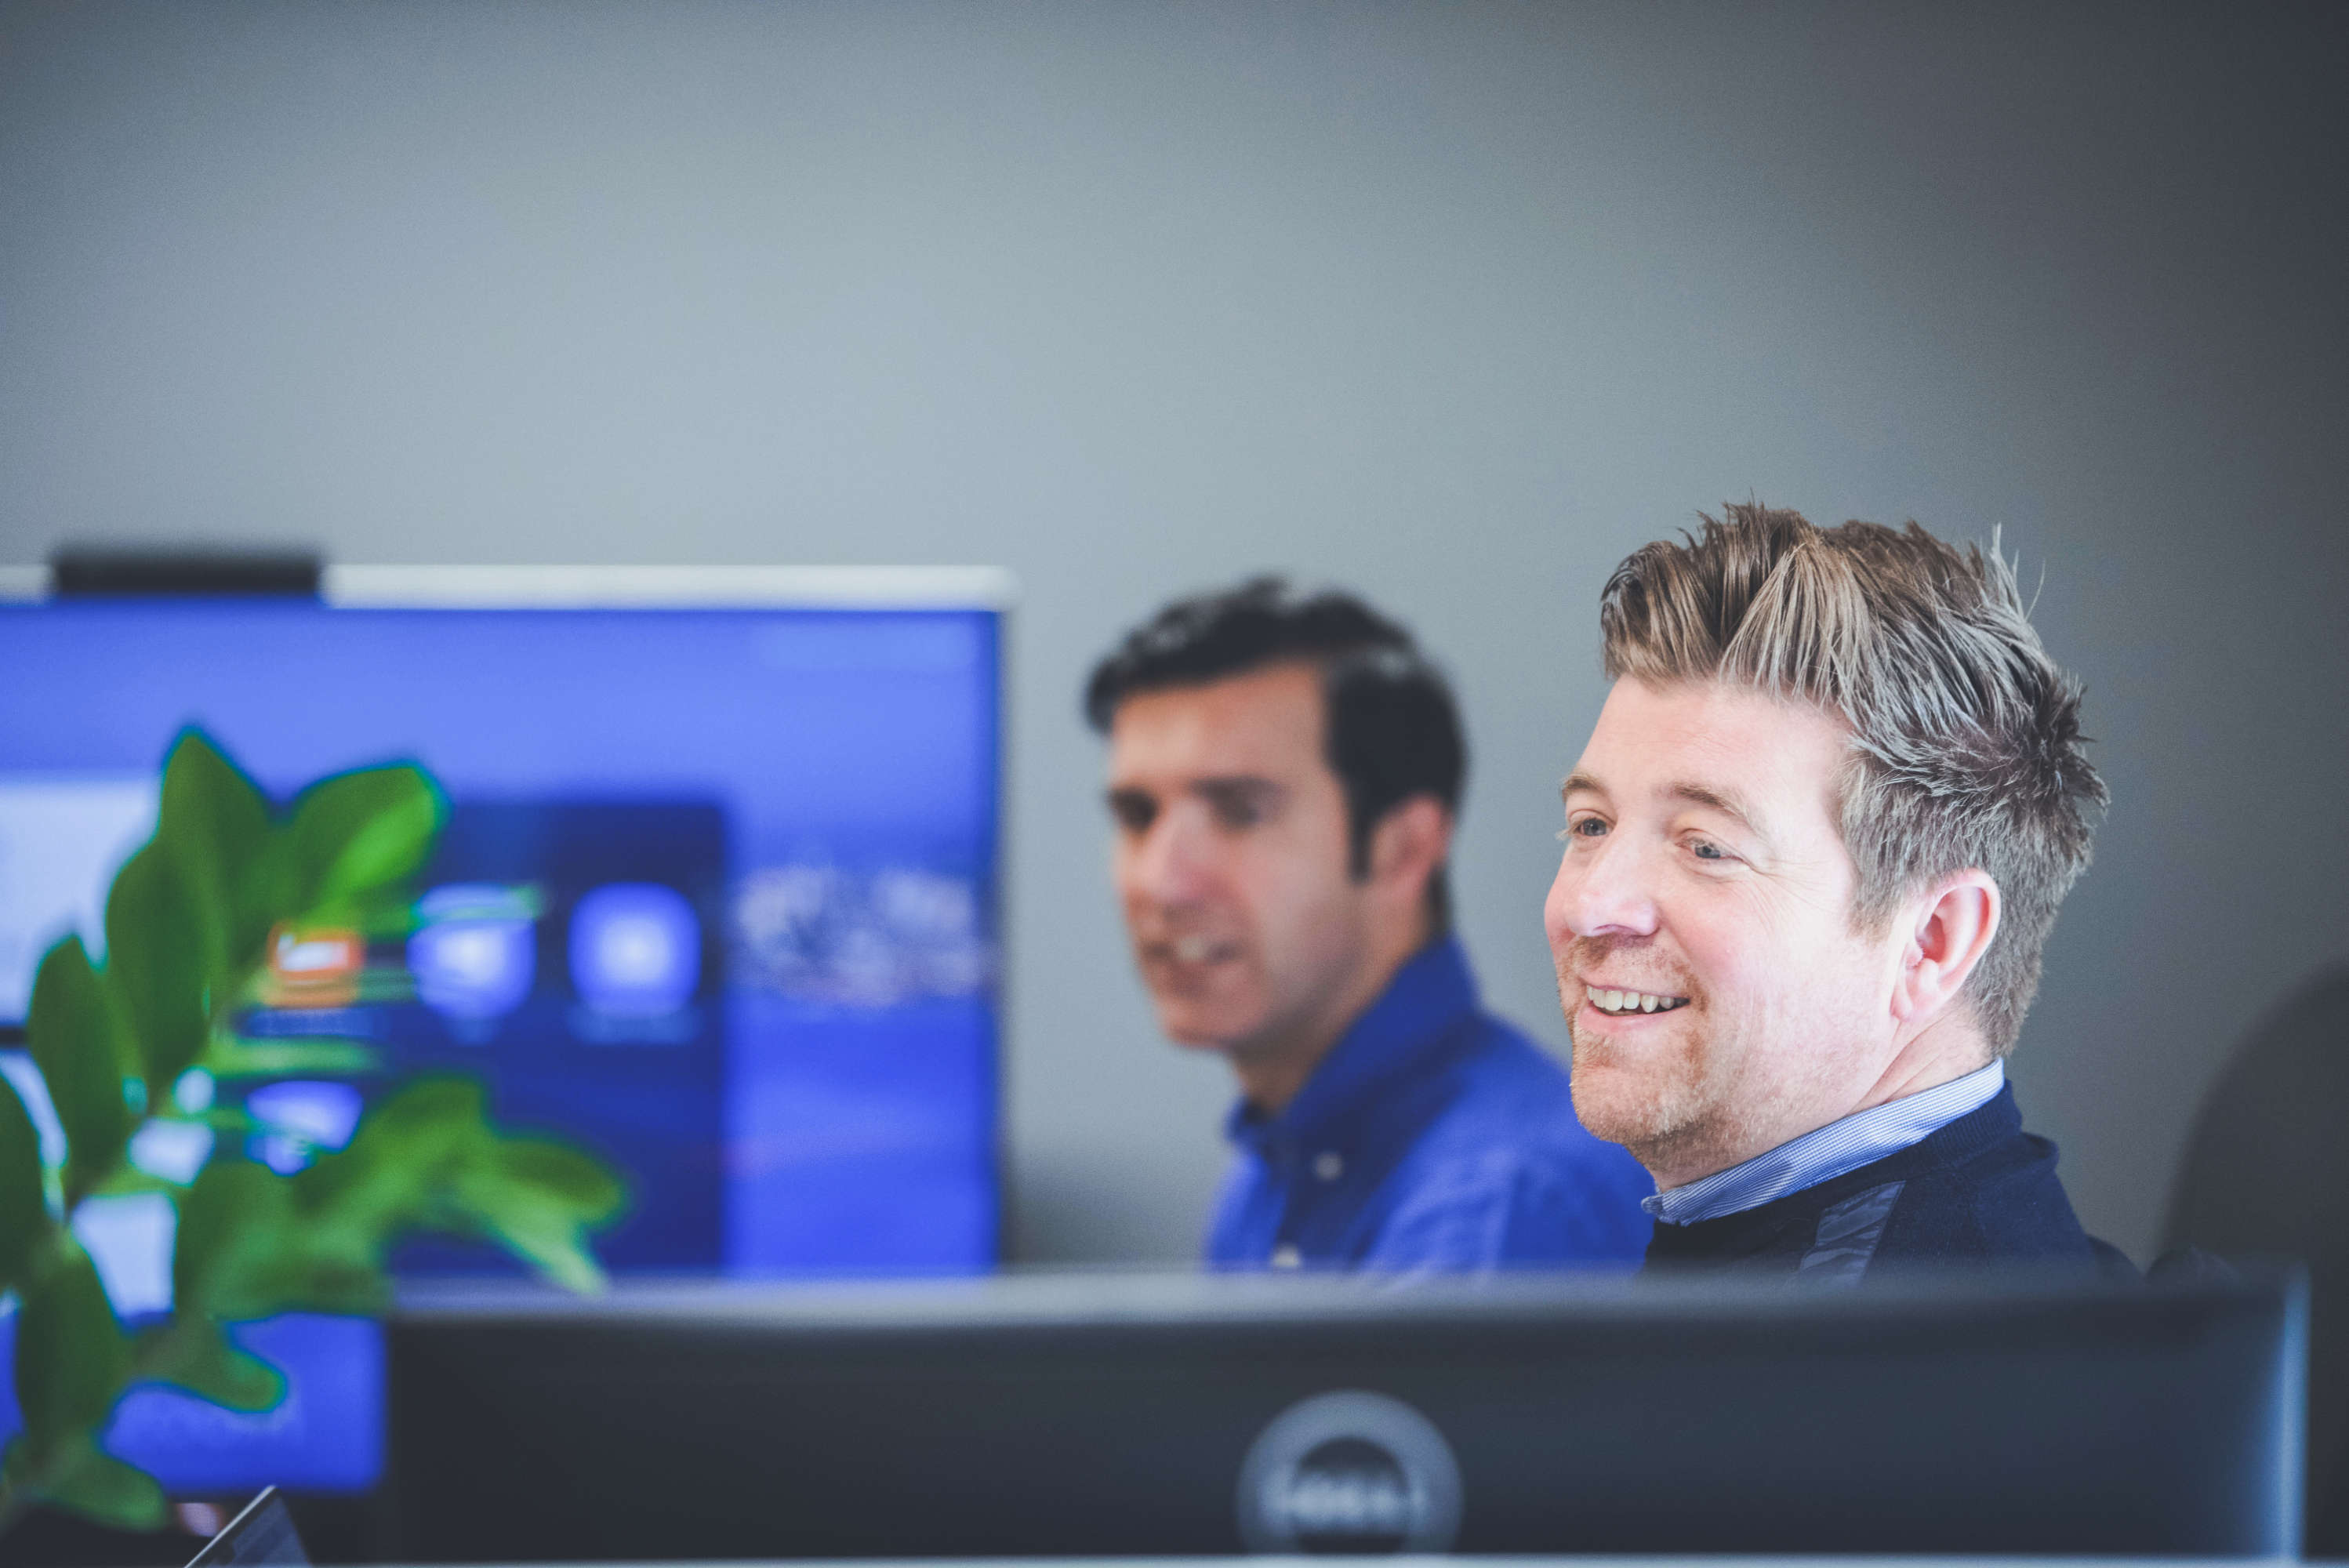 Managing director smiling whilst looking at a colleague over his monitor.